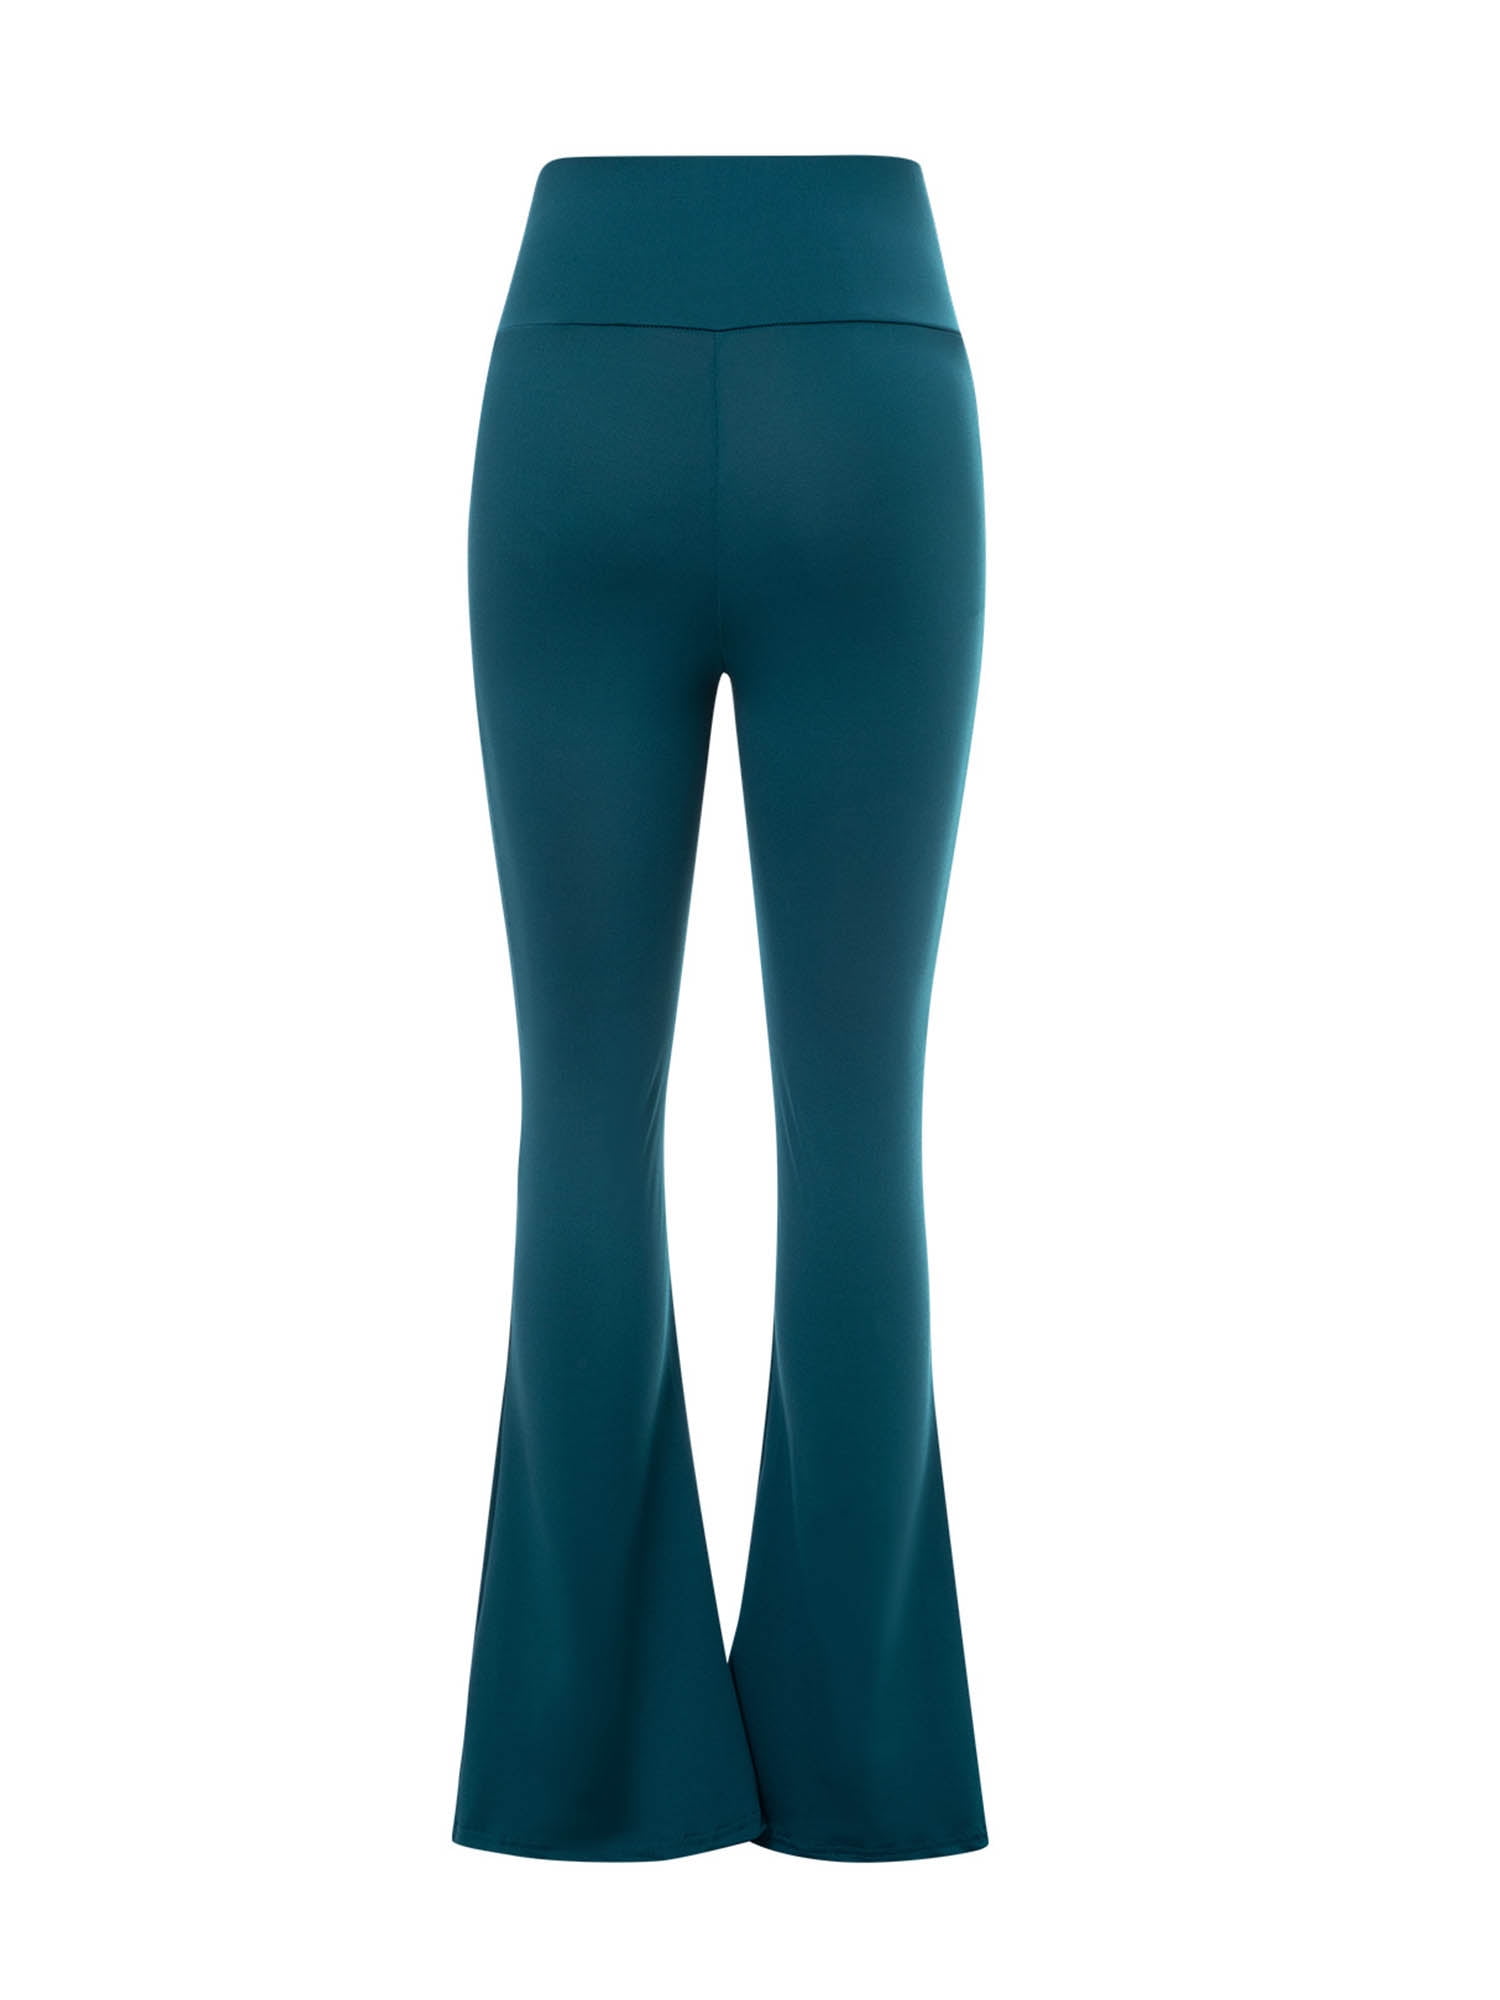 Womens High Waist Yoga Flared Wide Leg Sports Trousers Solid Color Slim Fit Flare  Leggings Aerie For Gym, Running, And Dance Plus Size Available From  Fashionsclothing, $18.1